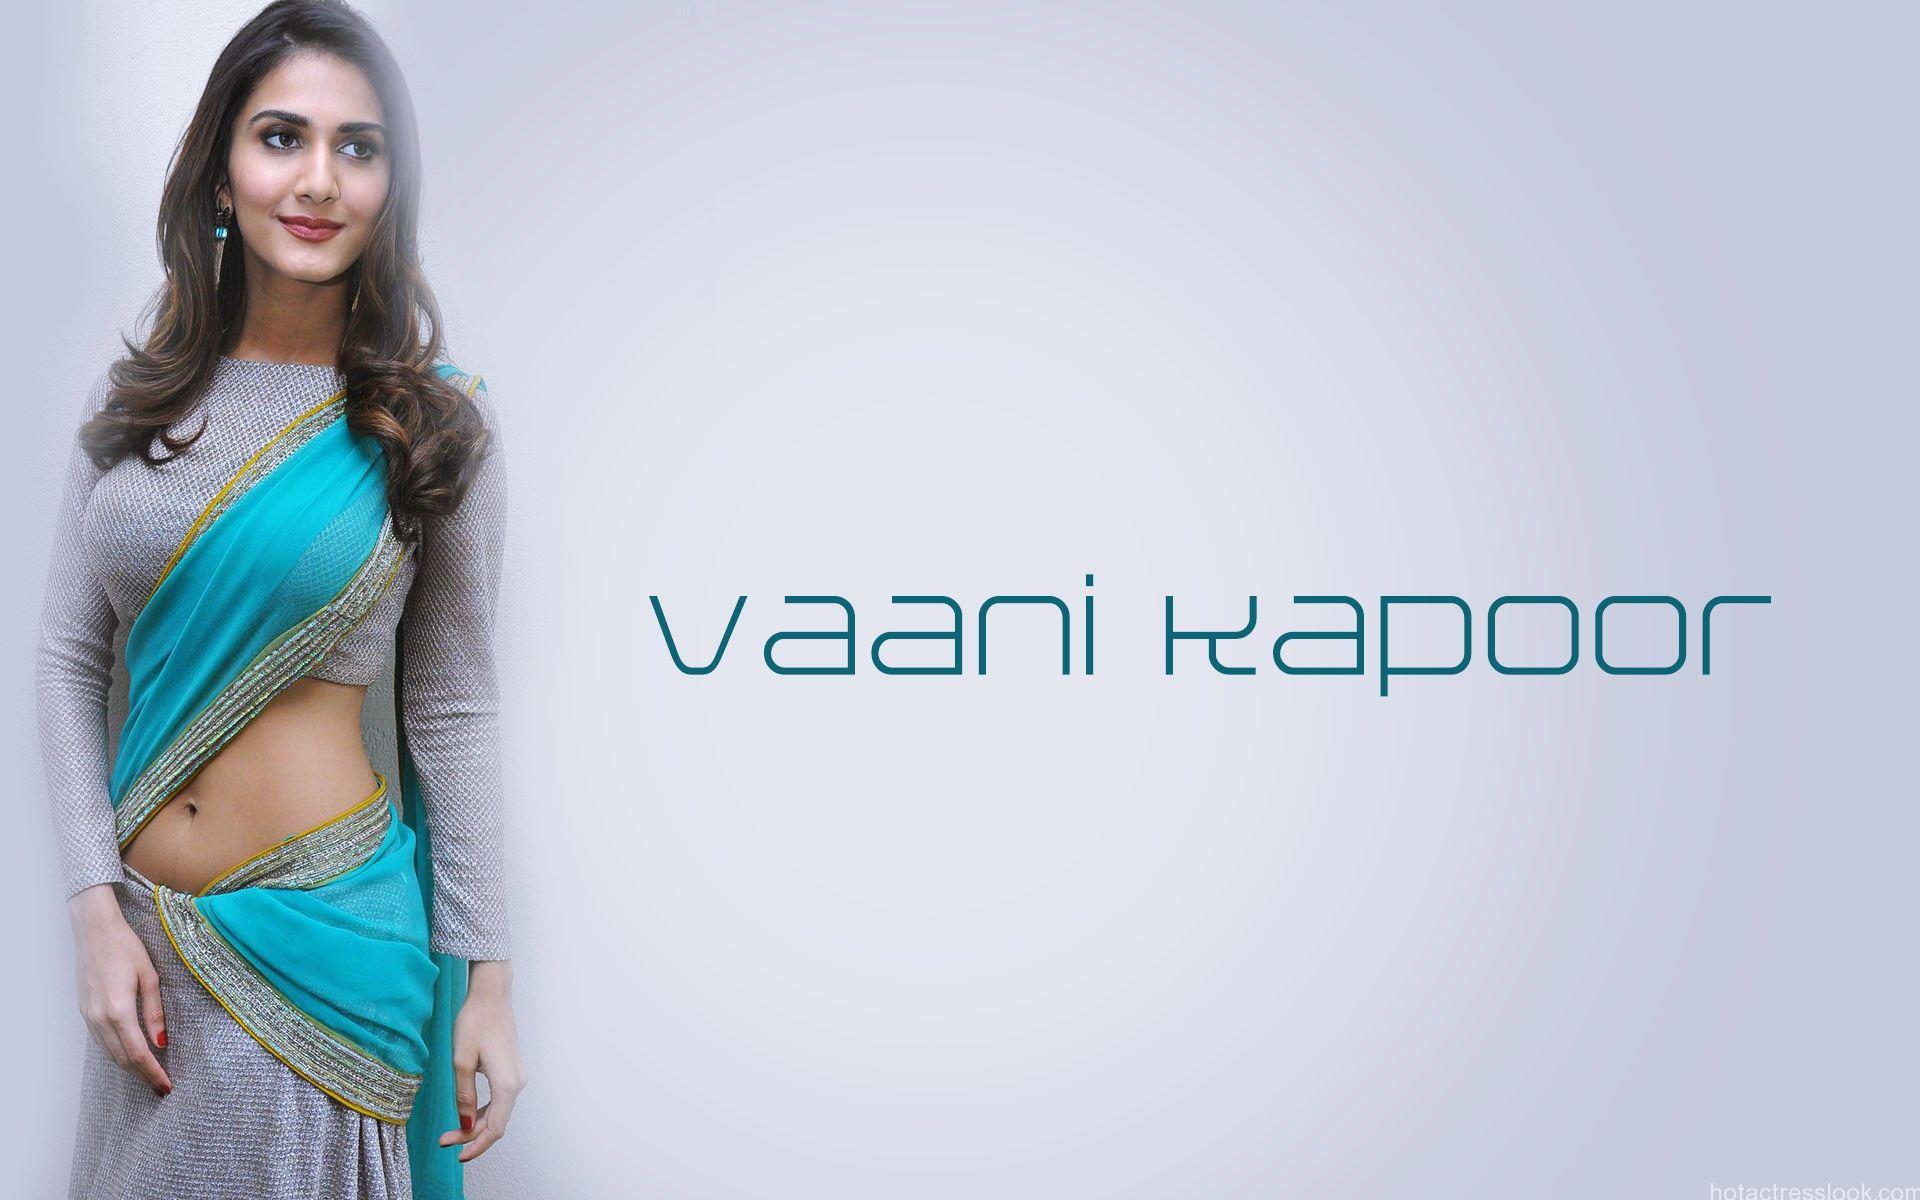 Vaani Kapoor Hot And Sexy Wallpapers Collection Hd Biography Facts Body Measurements